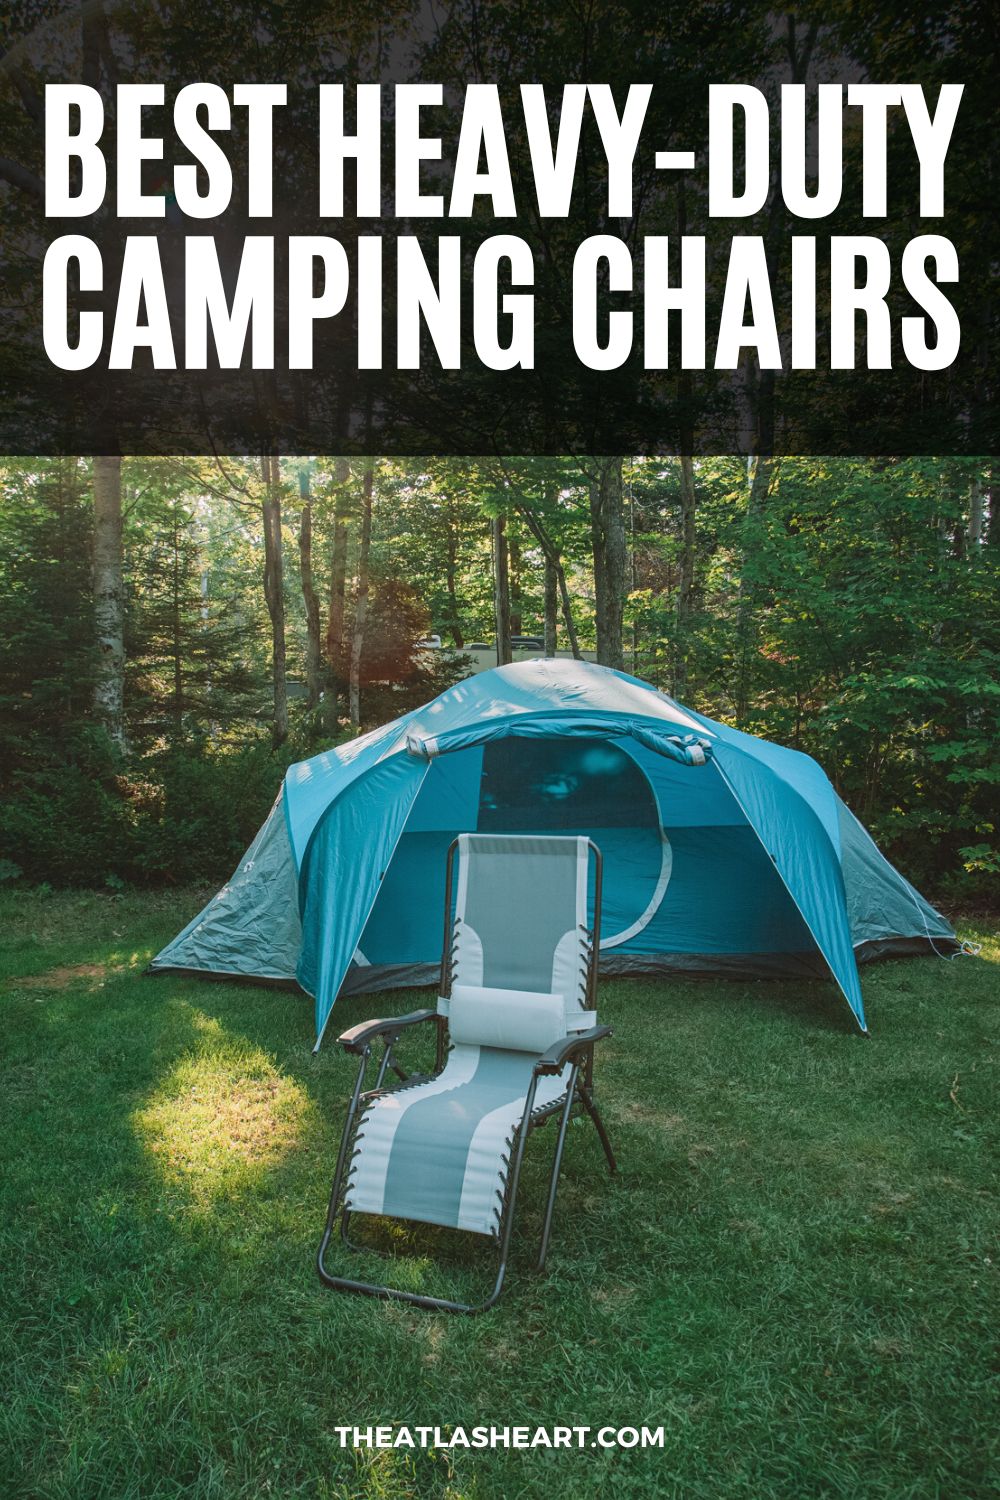 15 Best Heavy-Duty Camping Chairs for Bigger & Heavier People